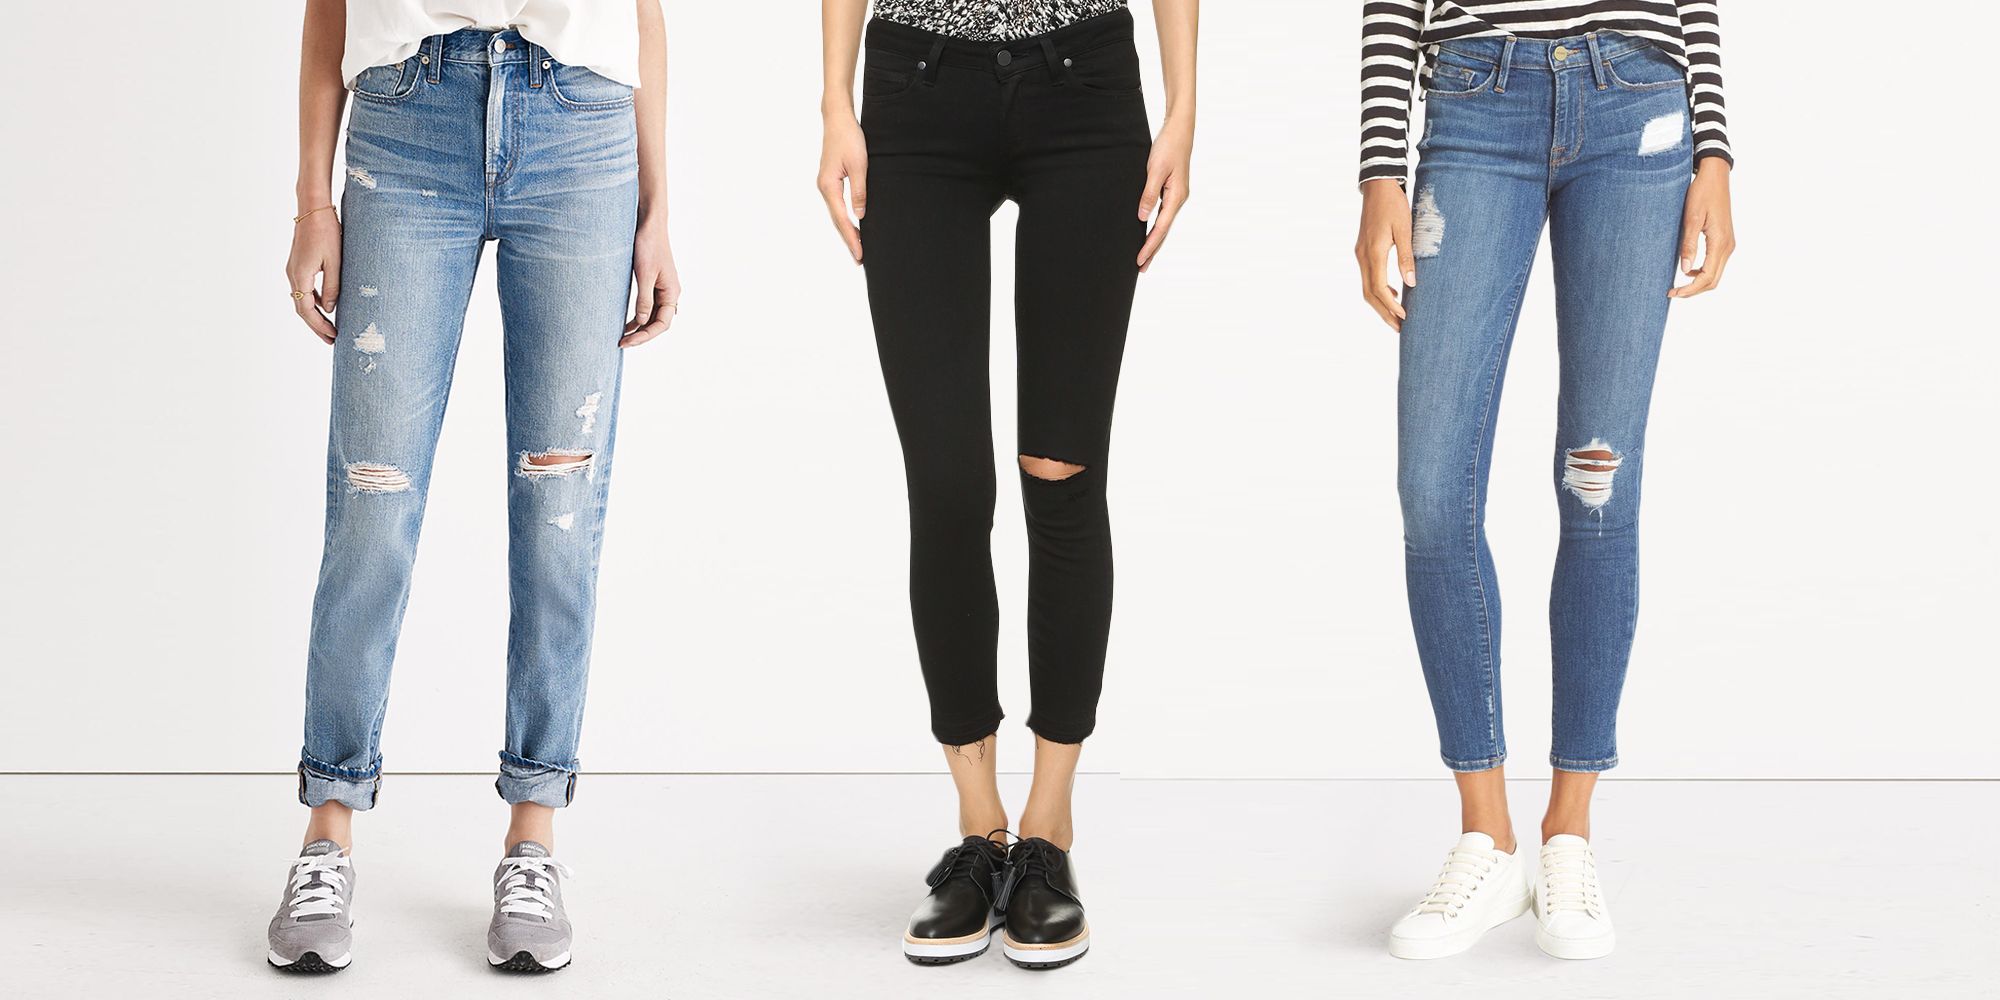 9 Best Distressed Jeans for 2018 - Ripped Jeans and Distressed Denim for  Women